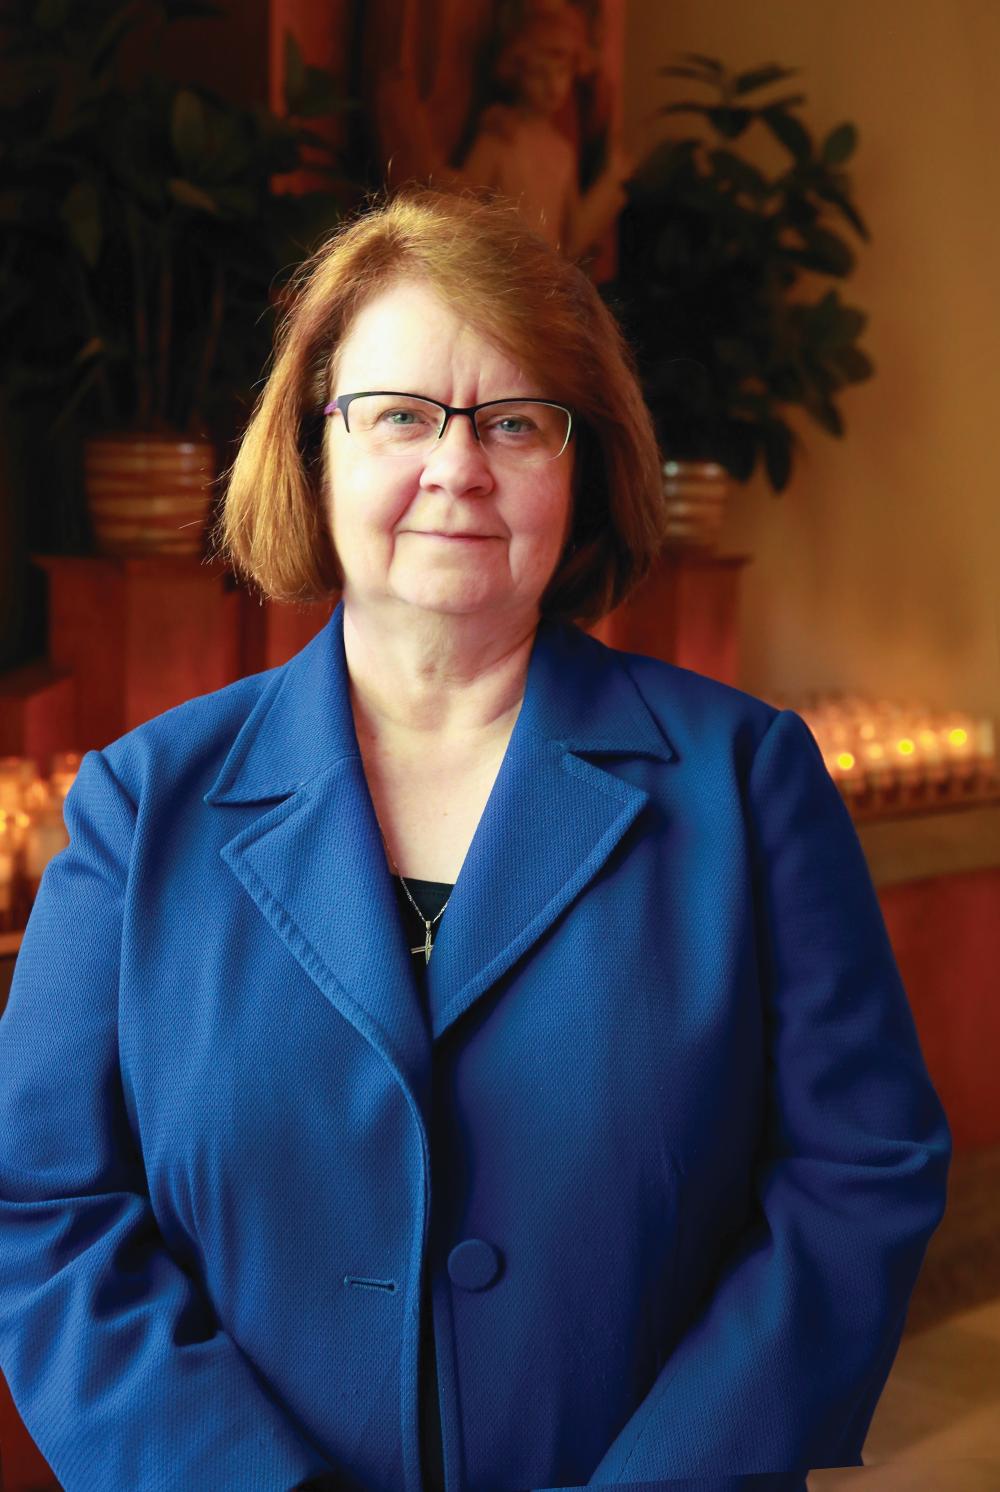 Donna's financial expertise helps keep diocese and parishes strong